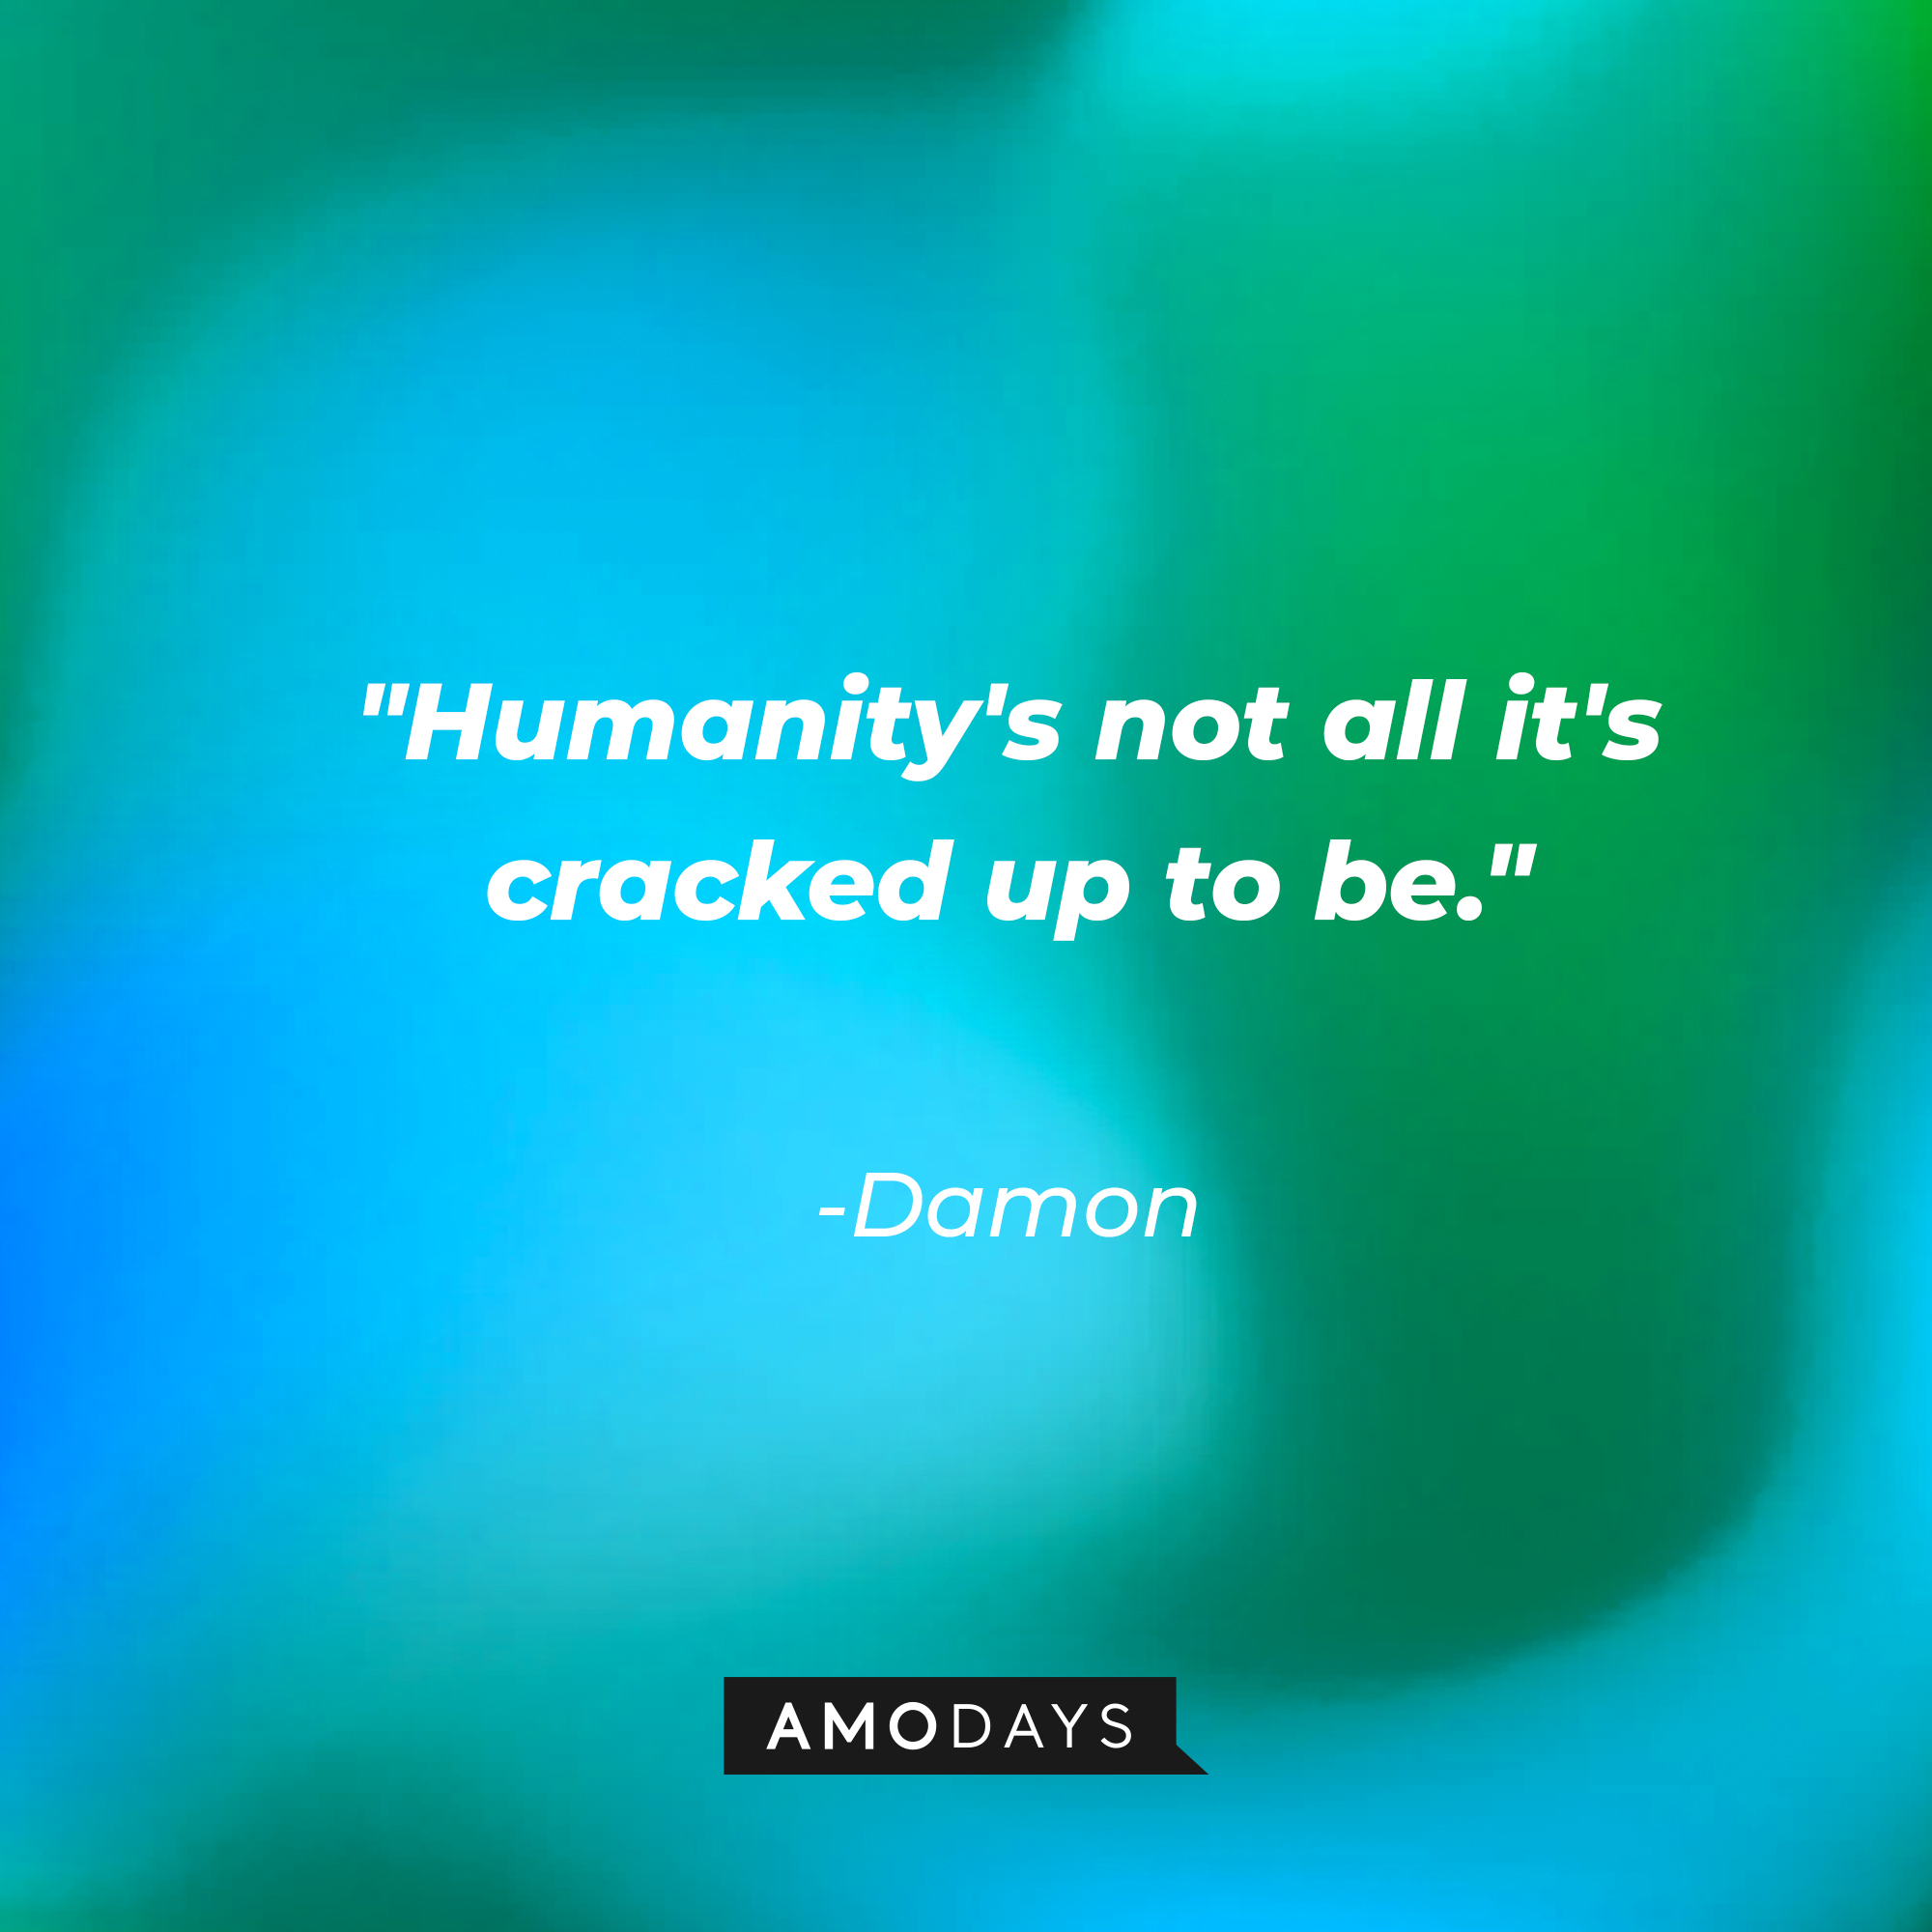 Damon's quote: "Humanity's not all it's cracked up to be." | Source: Amodays